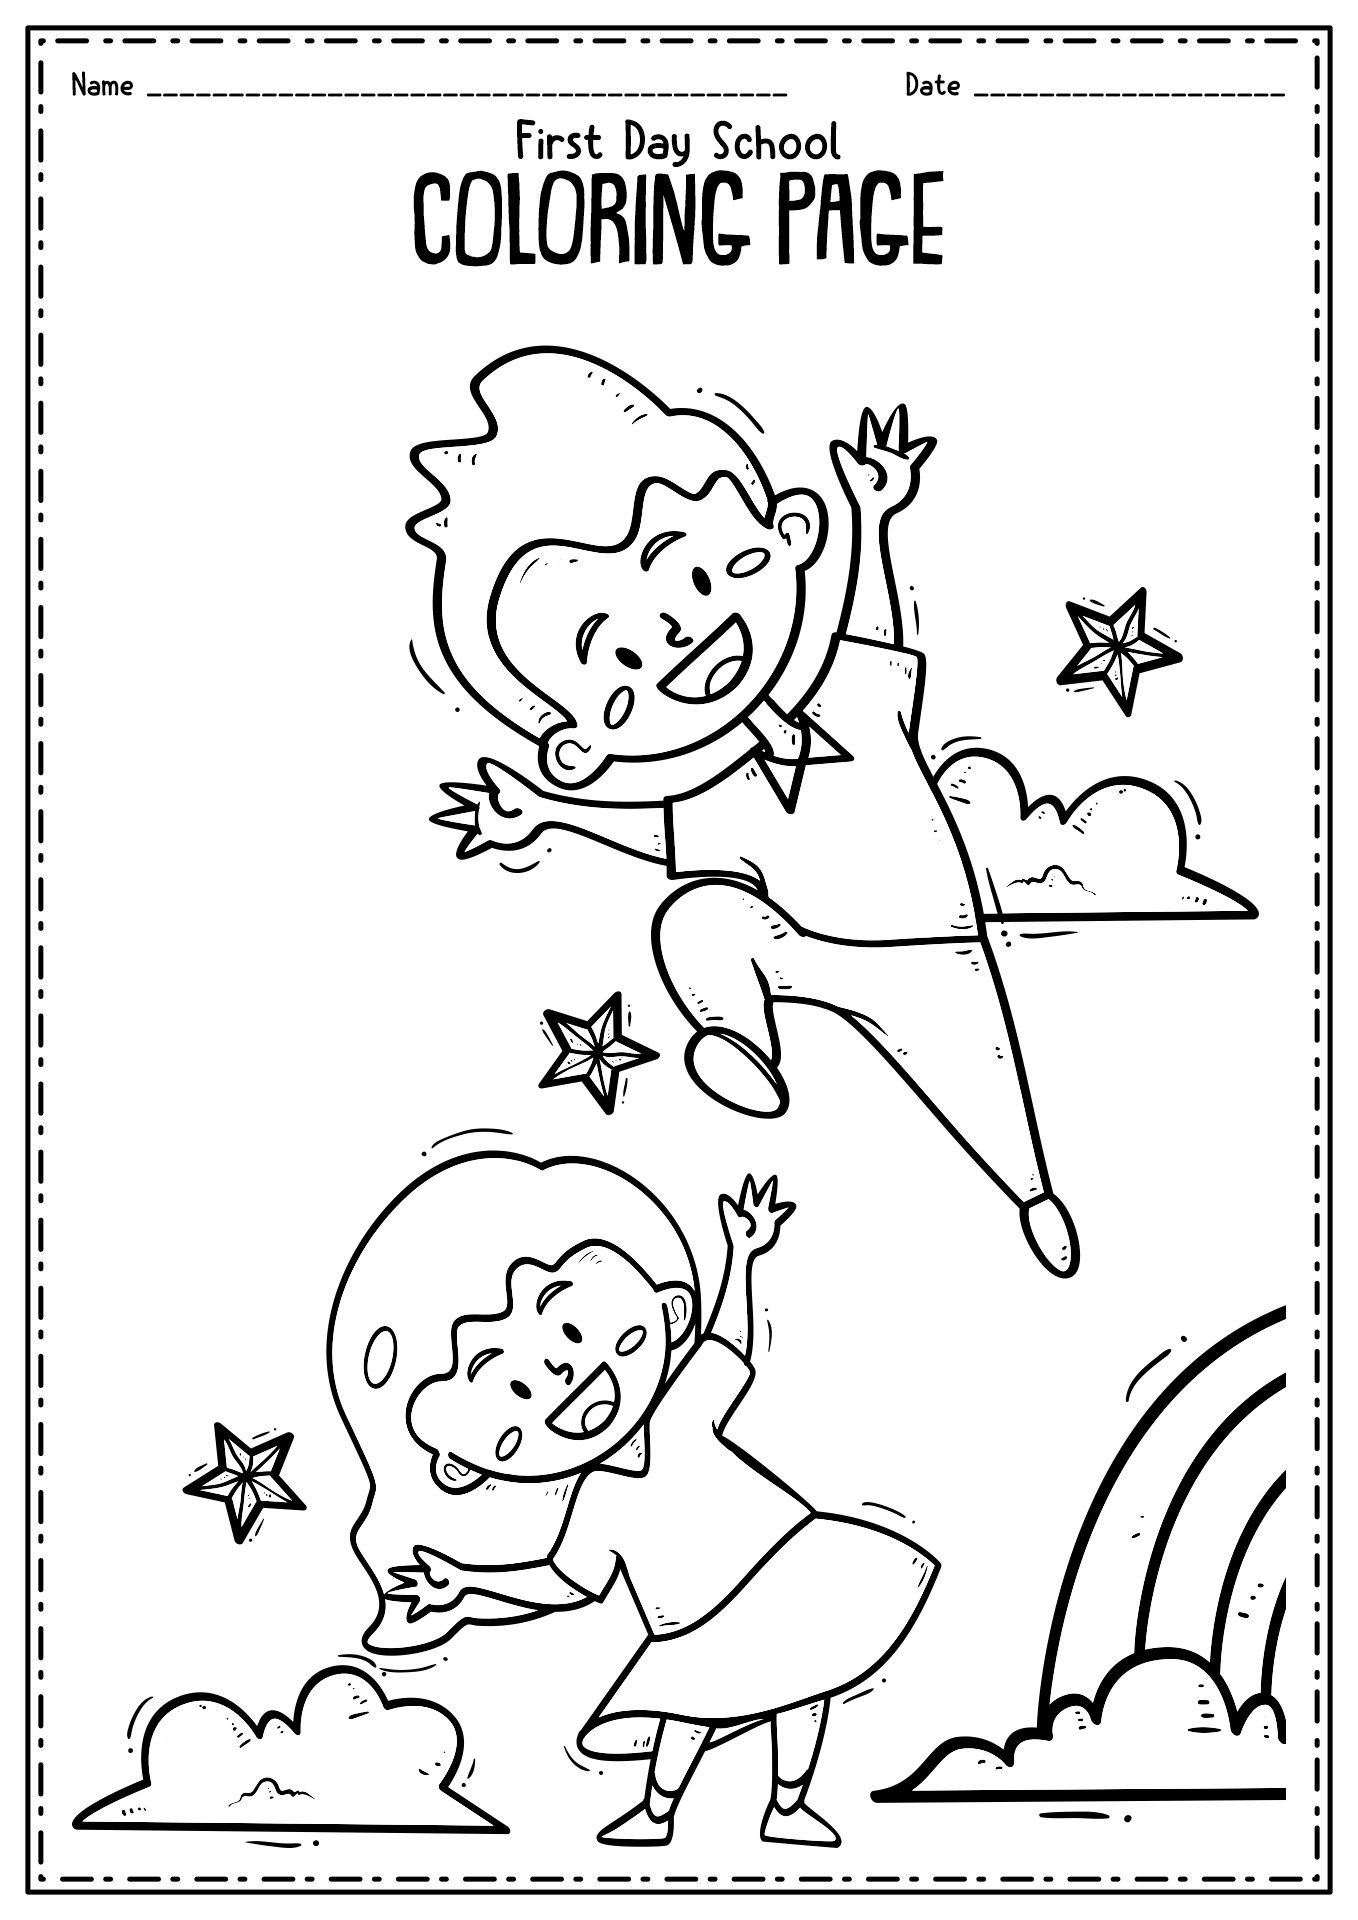 First Day of School Kindergarten Coloring Page Image